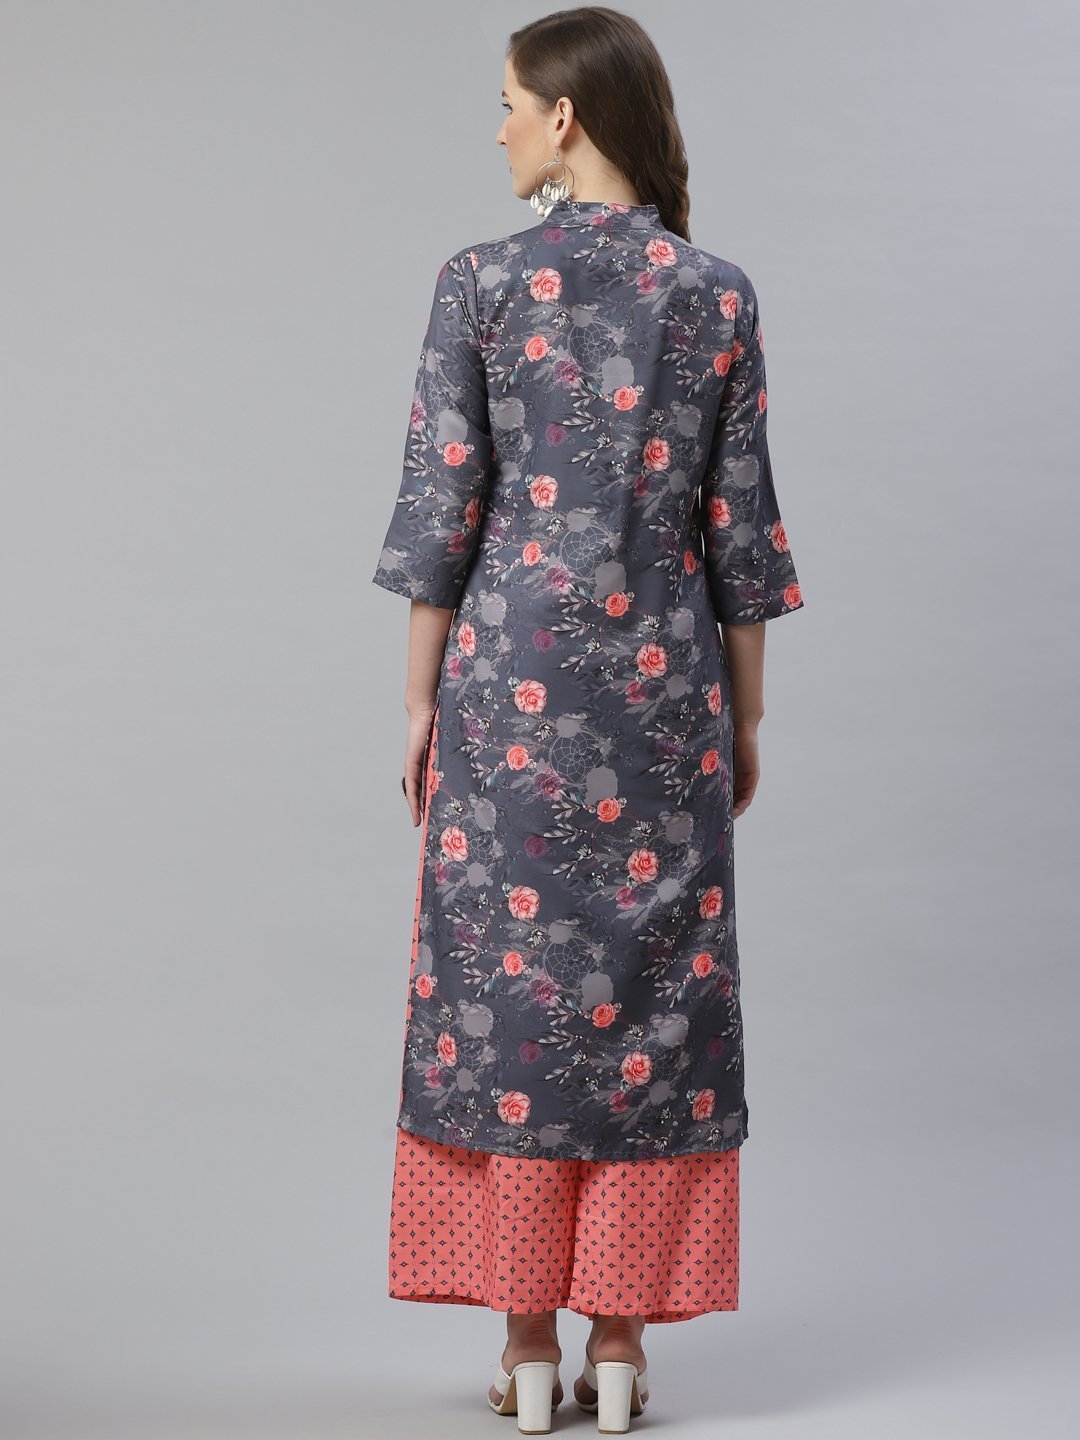 Women's Charcoal Grey & Pink Floral Printed Kurta with Palazzos - Jompers